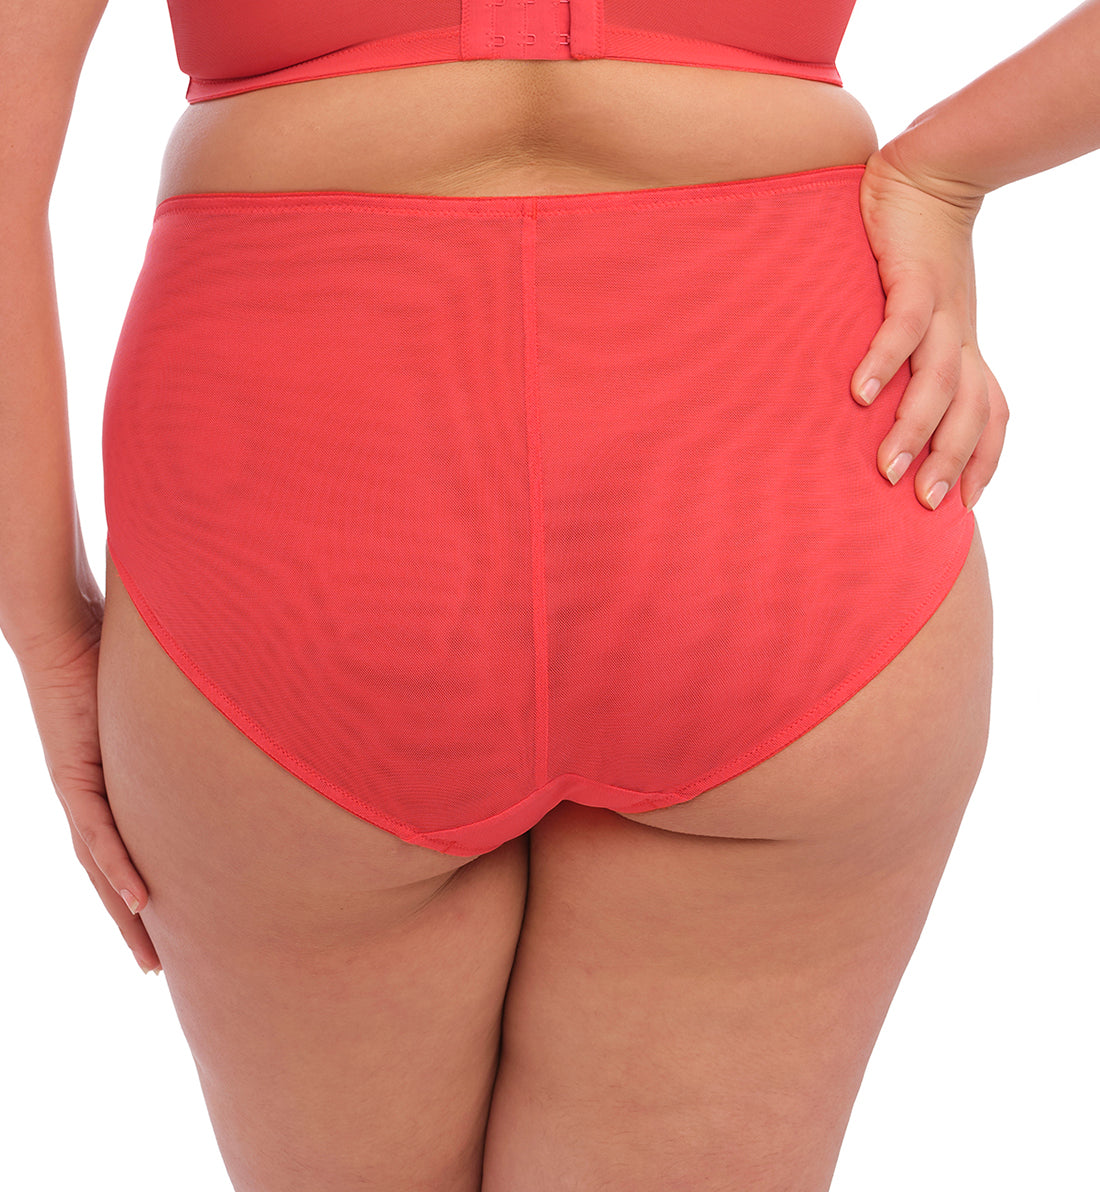 Elomi Brianna Full Panty Brief (8085),Large,Cayenne - Cayenne,Large